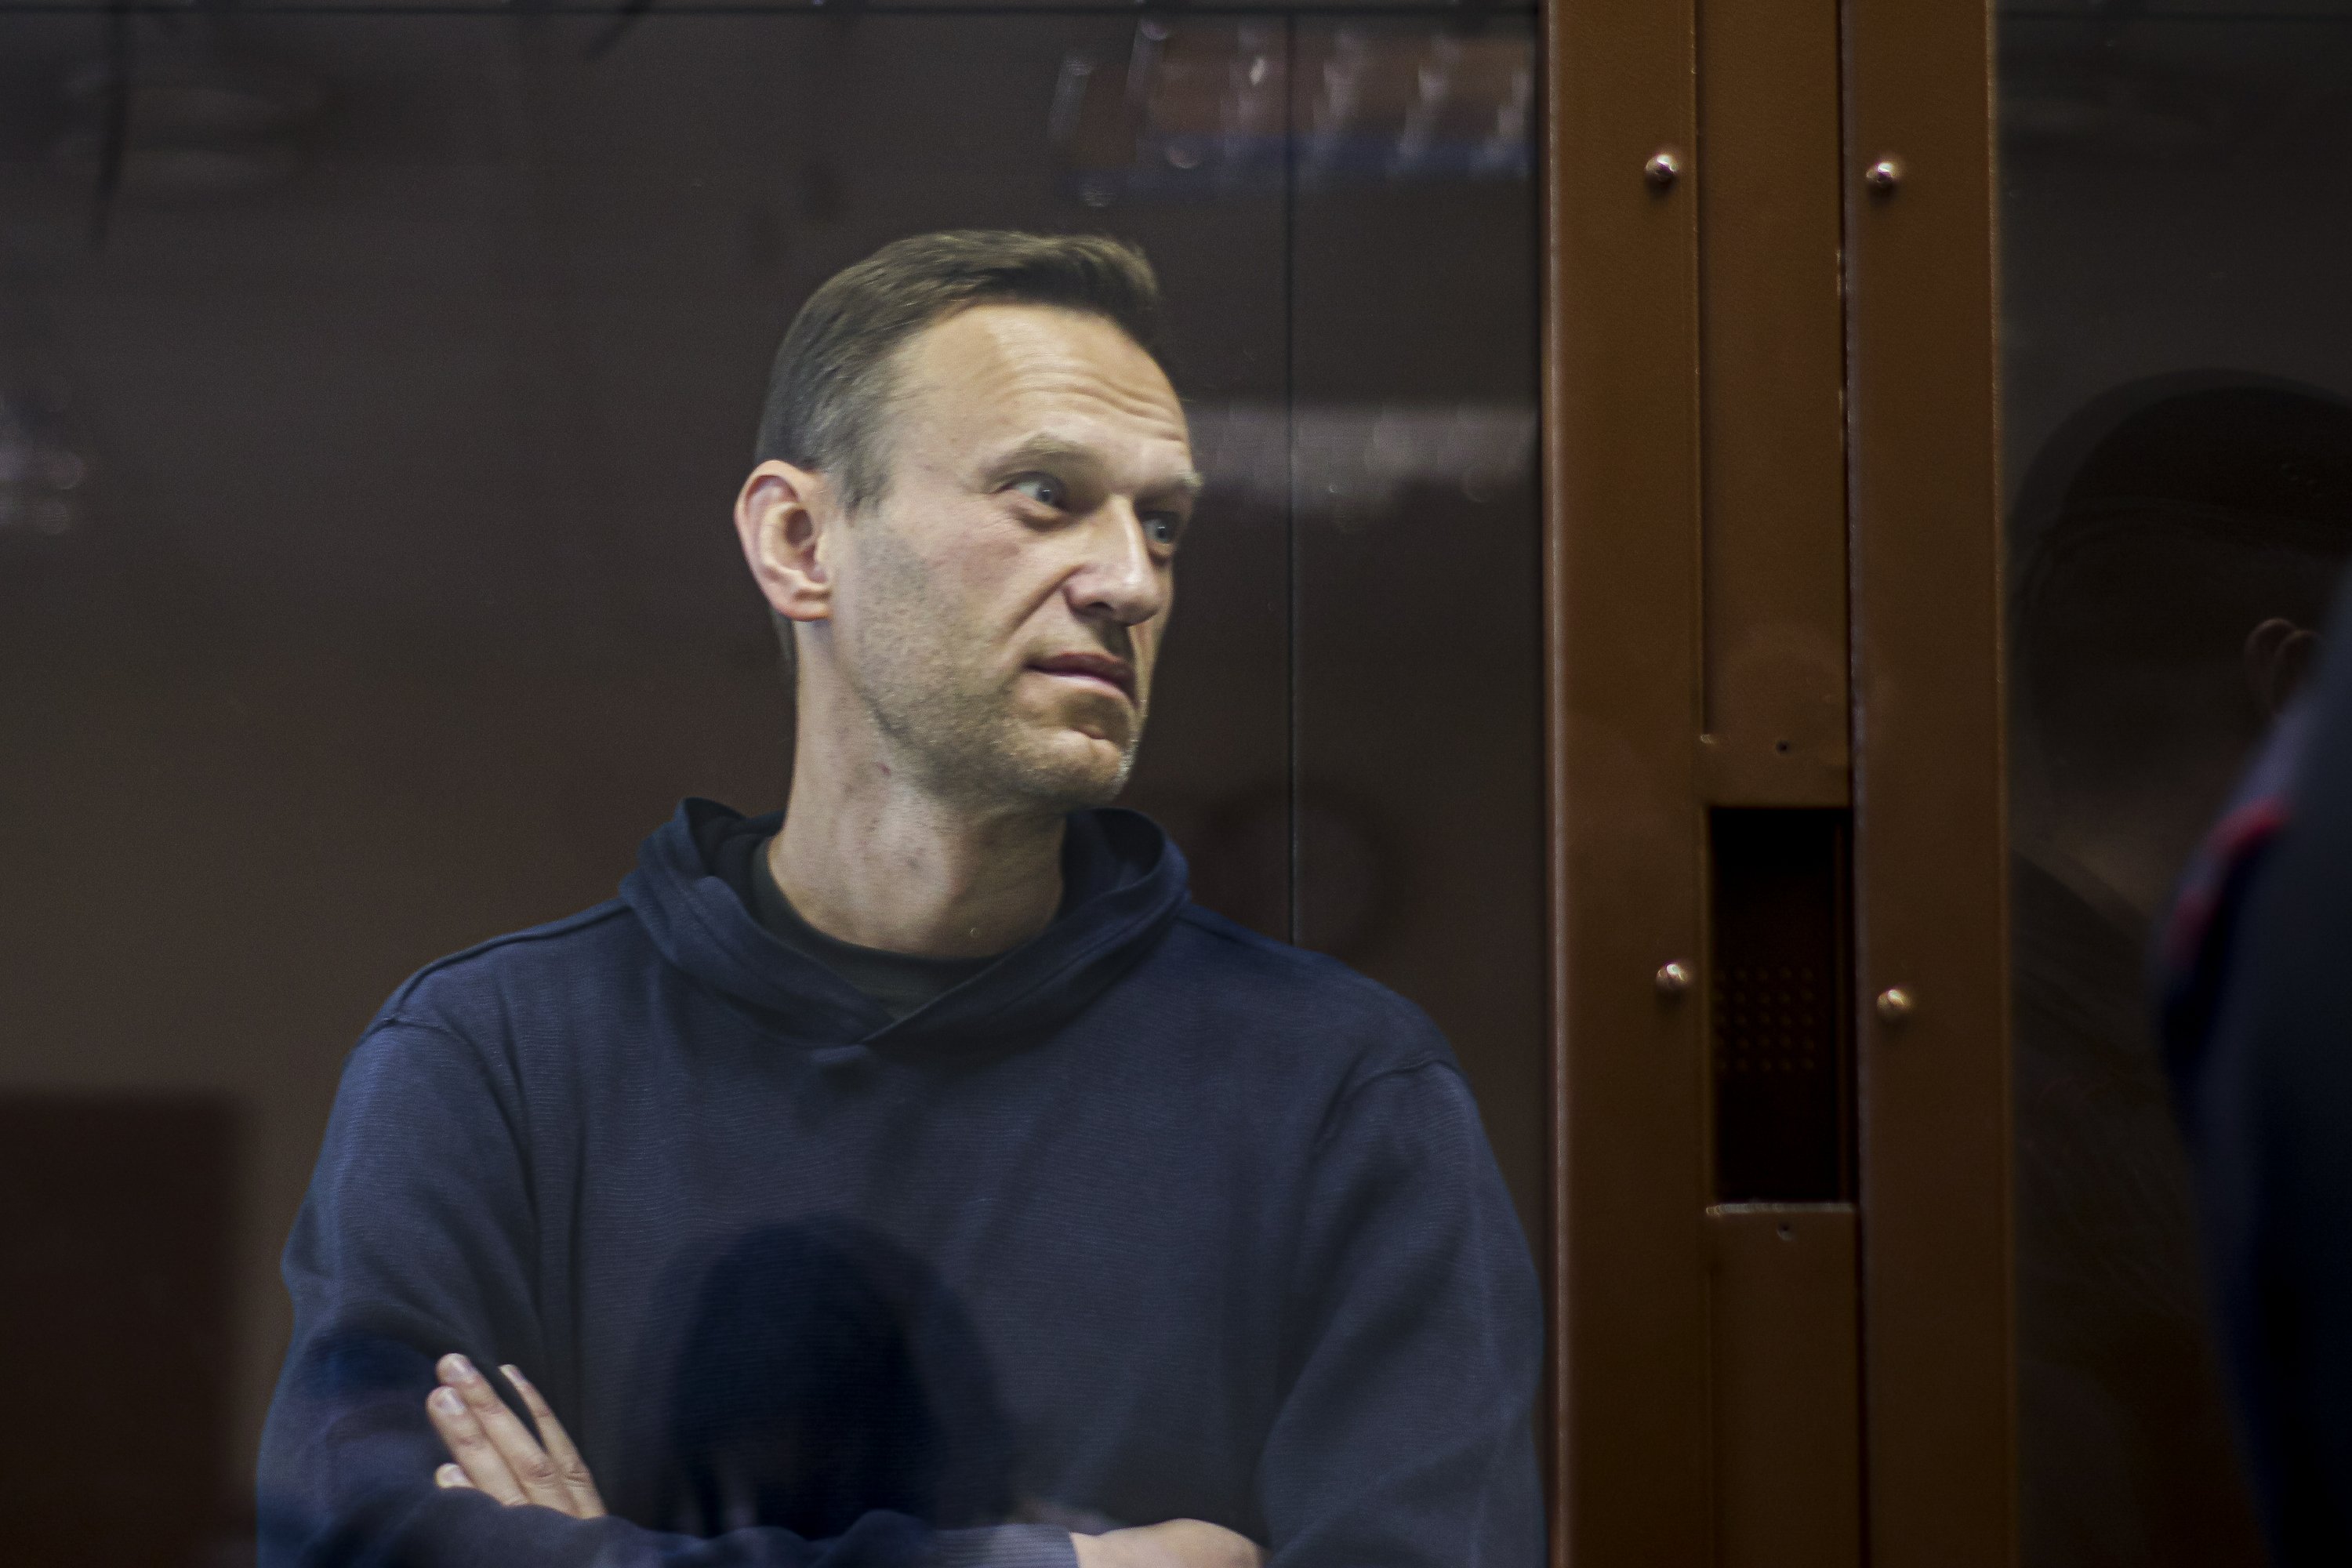 In new tactics, Navalny supports supporters in courtyards